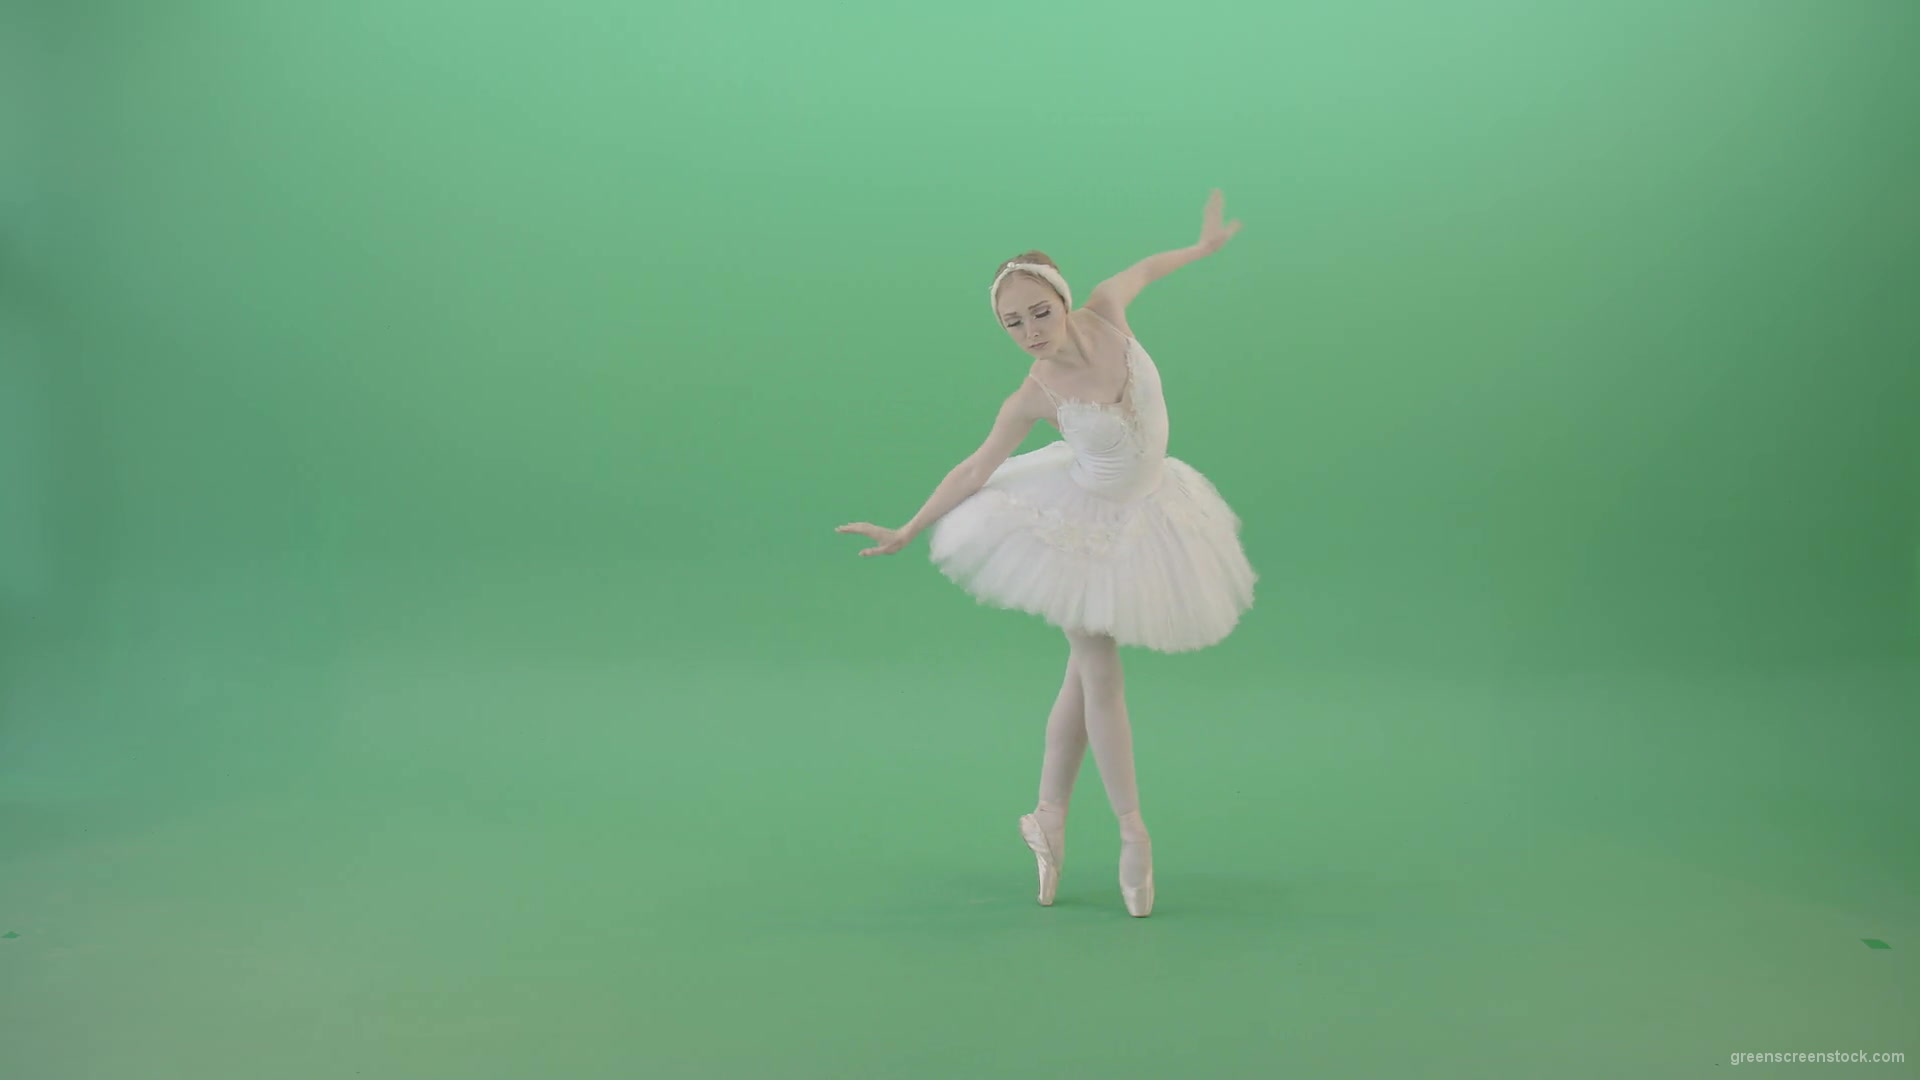 Fashion-snow-white-ballet-dancing-girl-showing-swan-lake-dance-isolated-on-Green-Screen-4K-Video-Footage-1920_004 Green Screen Stock